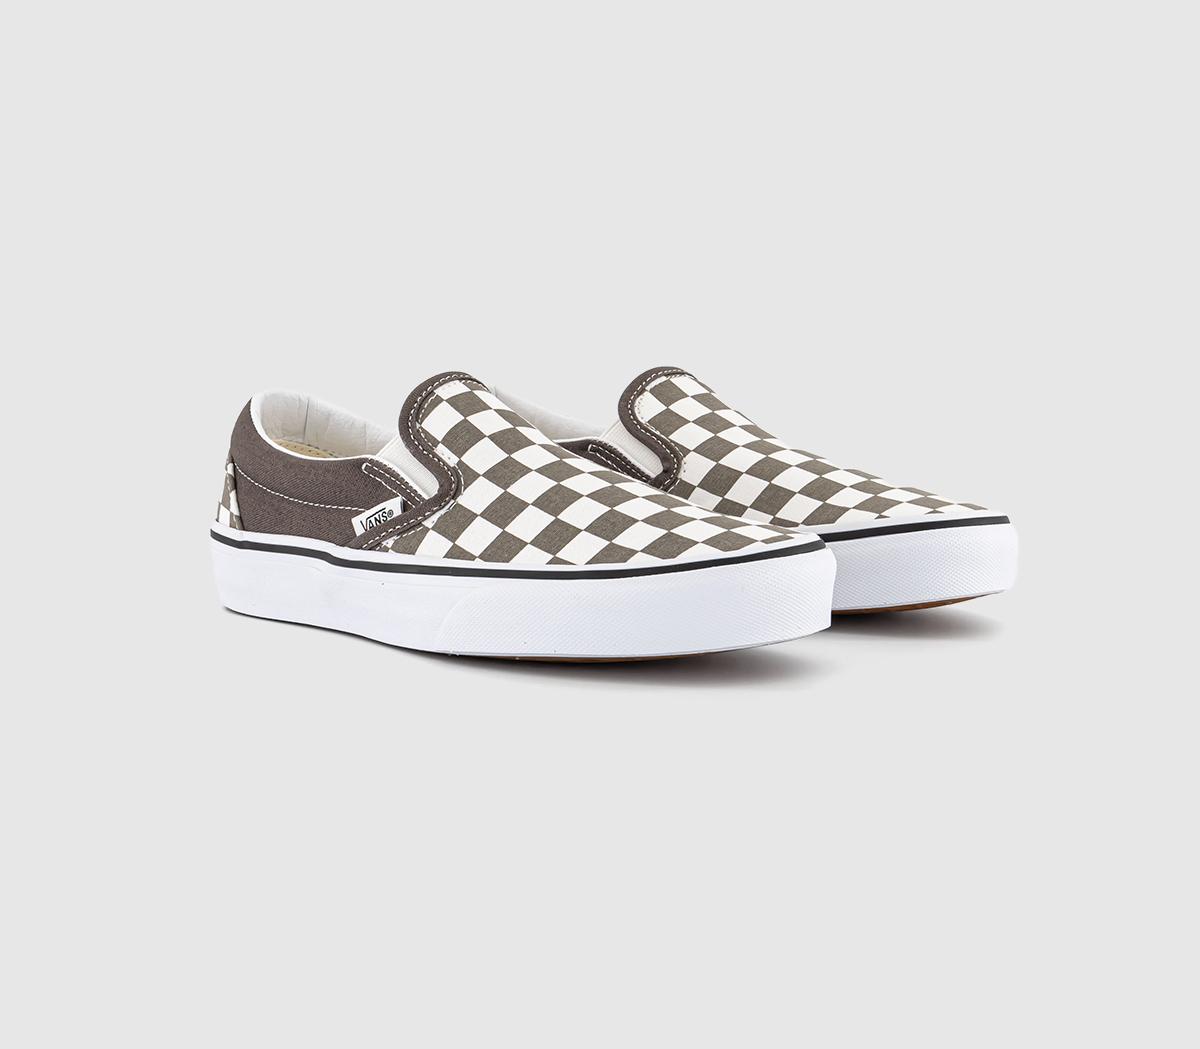 Vans Classic Slip On Trainers Color Theory Checkerboard Bungee Cord Brown/White, 4.5